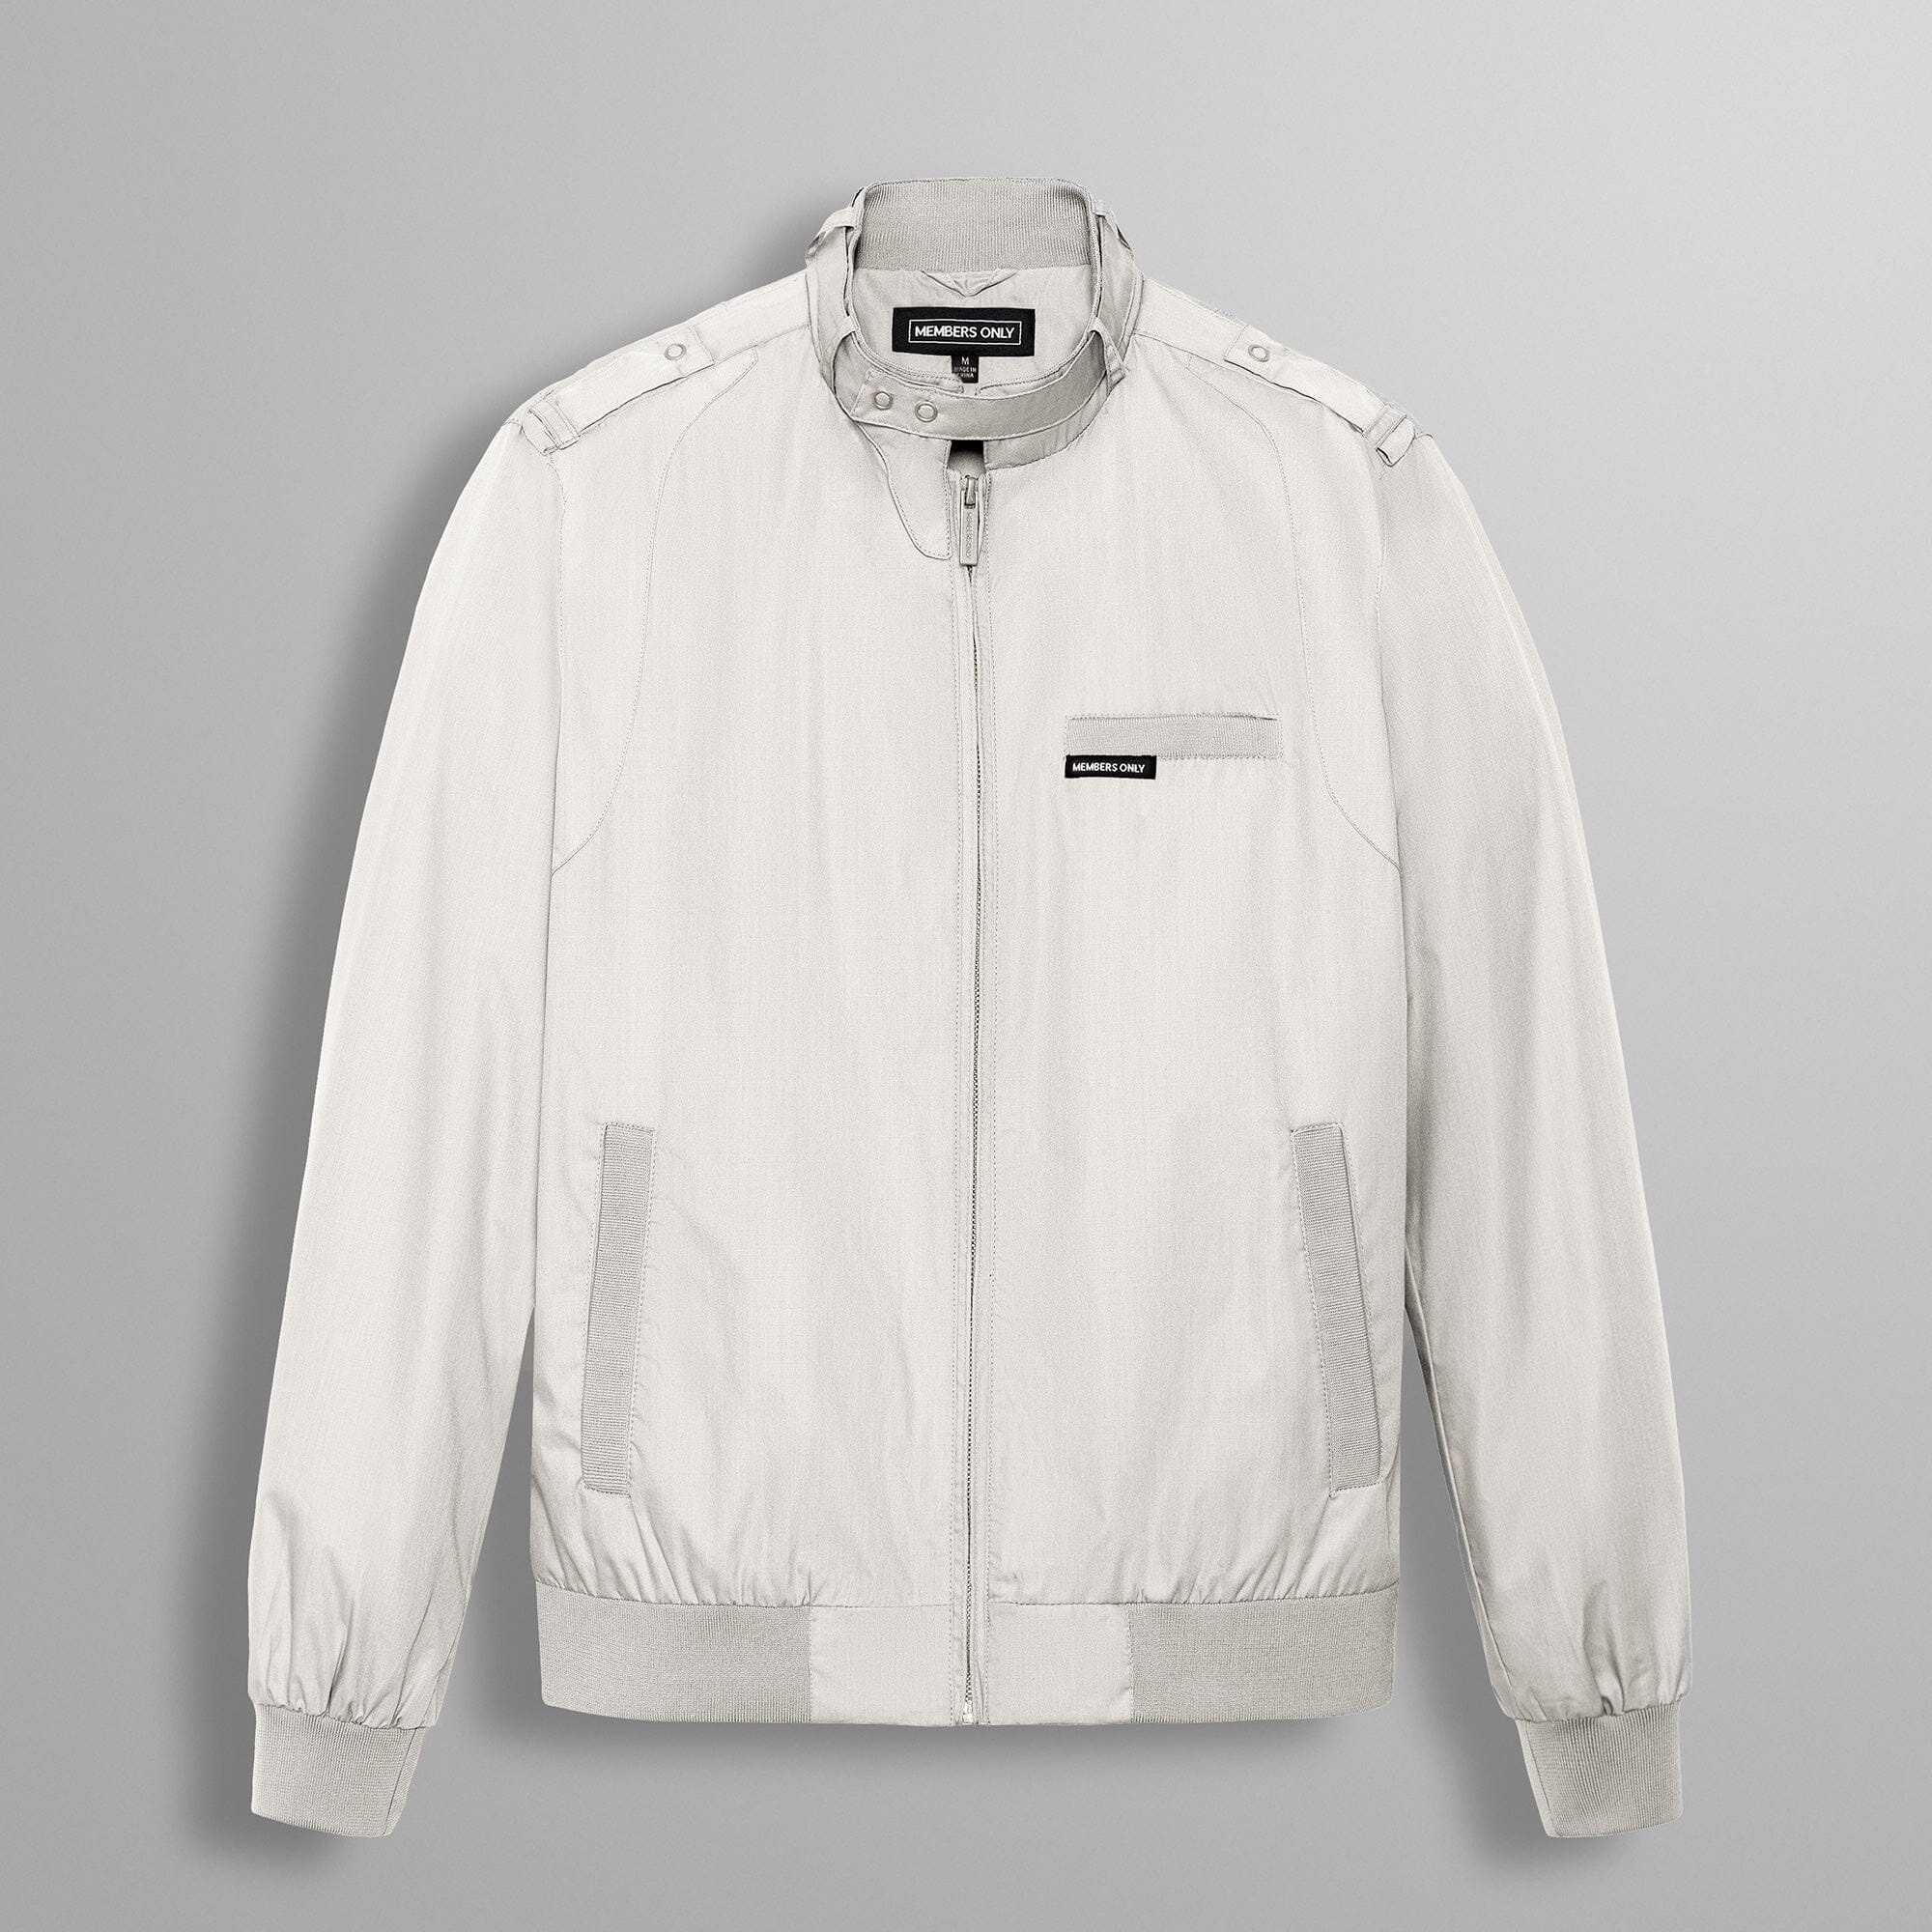 10 Members Only ideas  members only jacket, racer jacket, jackets